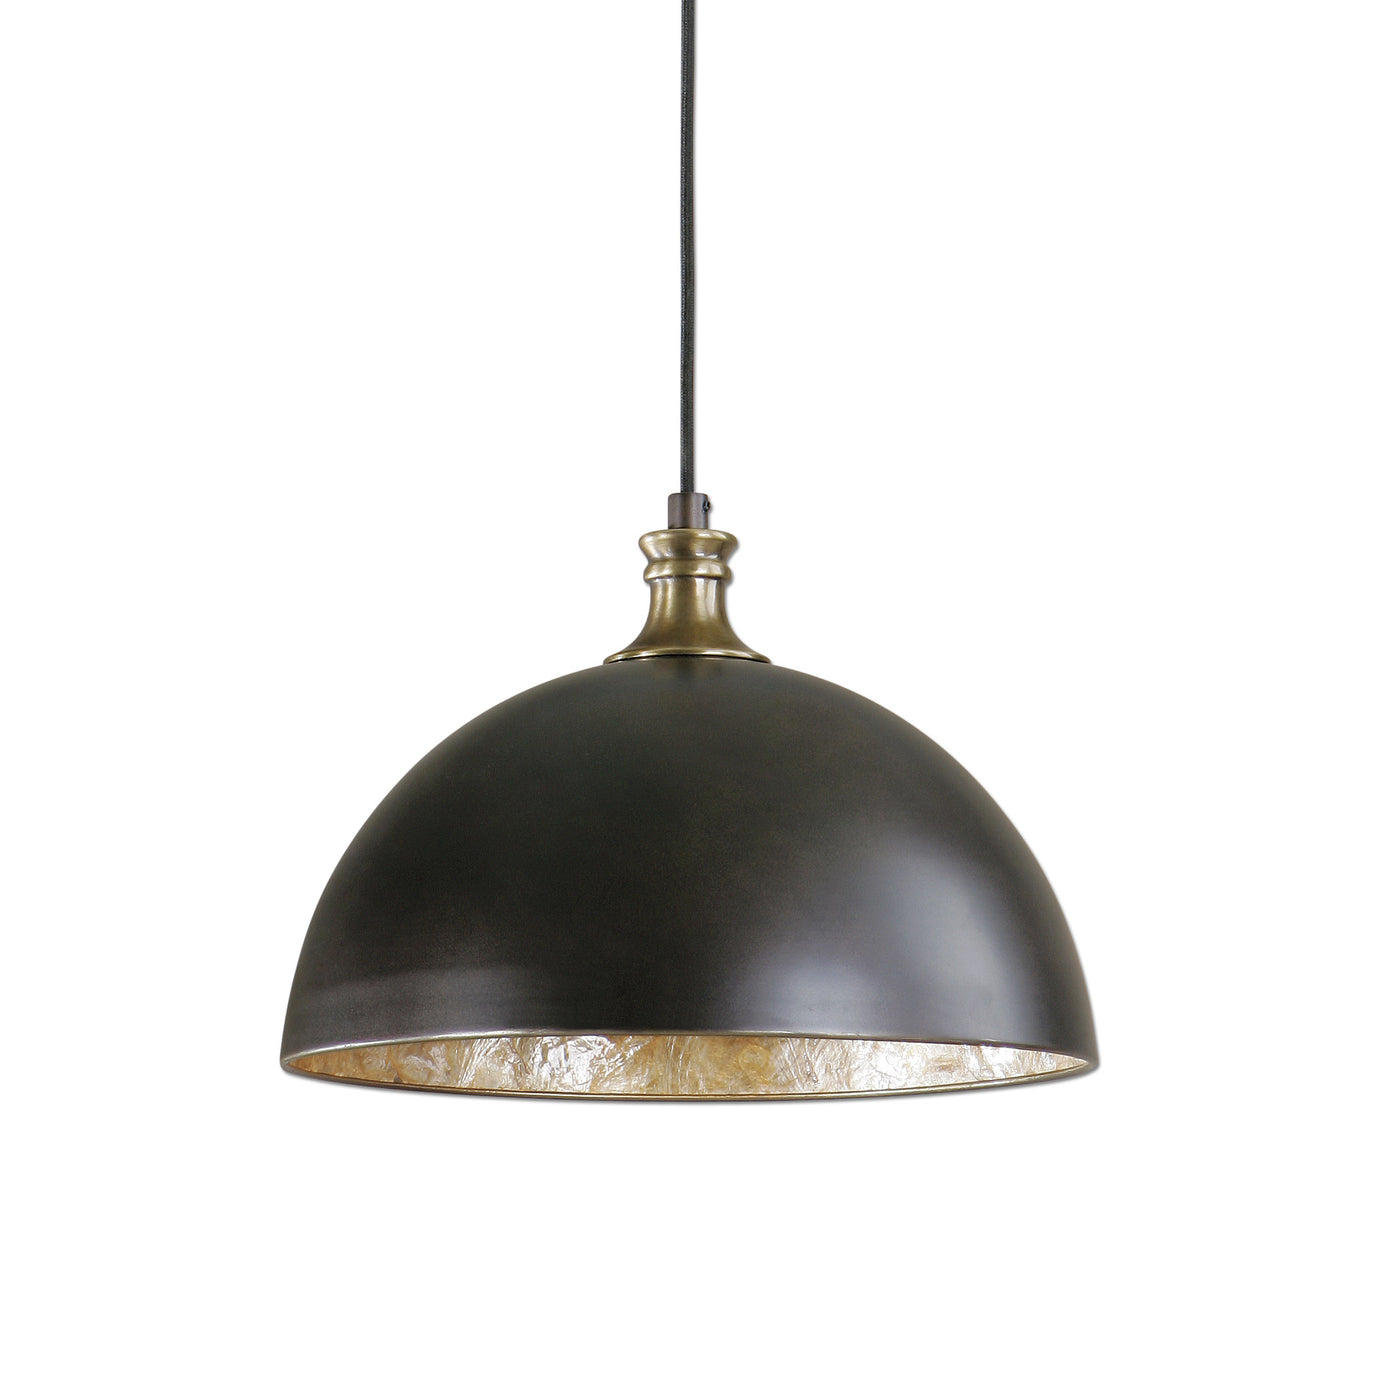 We Have Taken The Simple Look Of A Metal Dome Pendant In A Pacific Bronze Finish With Antique Brass Accents And Have Added...